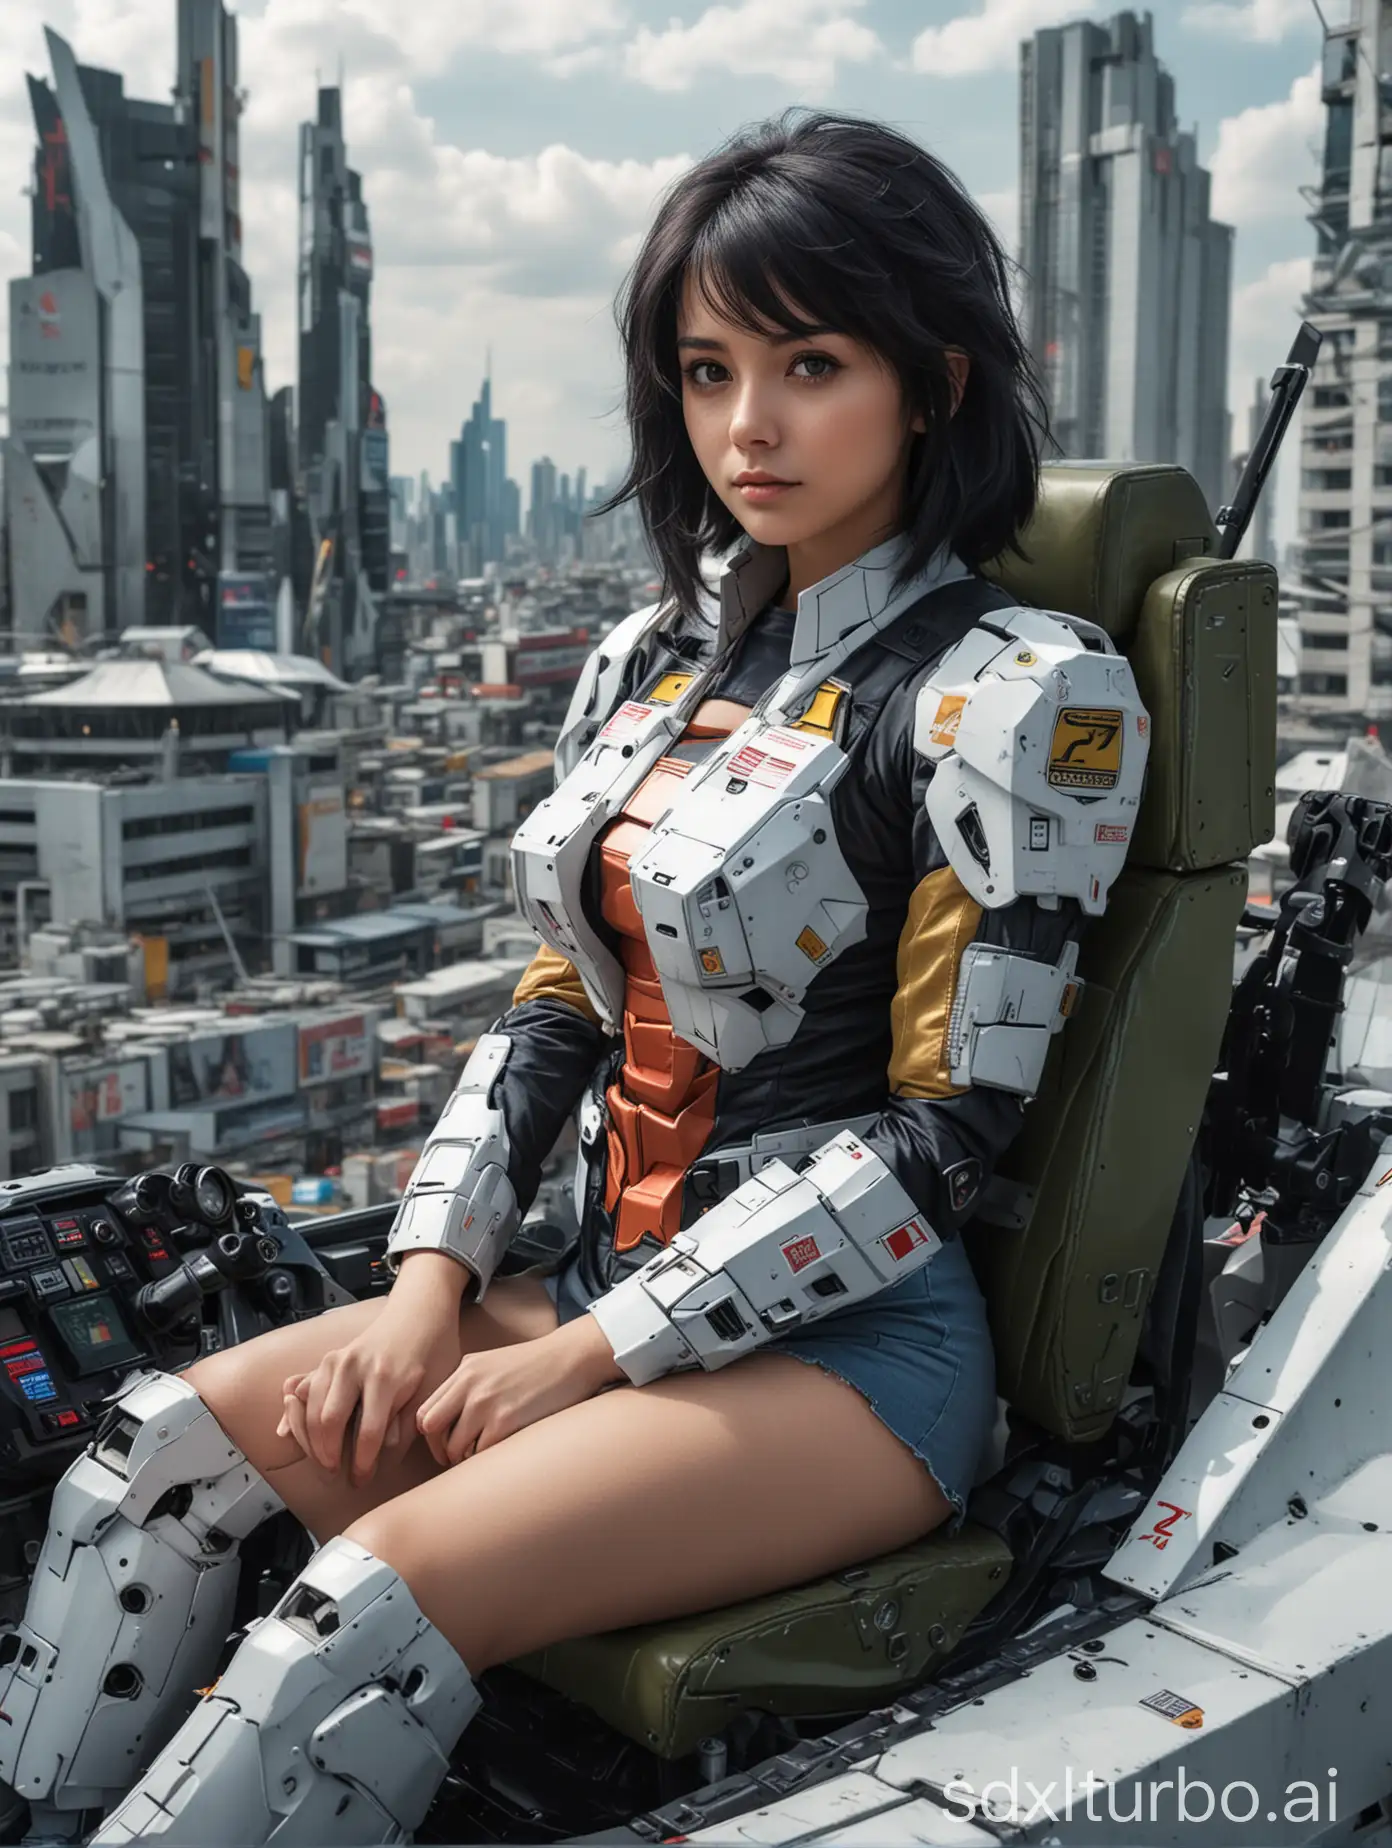 Masterpiece, dual aperture, realistic image about beautiful 27 years old girl, black hair,  sitting in the giant gundam, facing the camera,  in the cockpit there's a panel computer, cloudy, future city street background